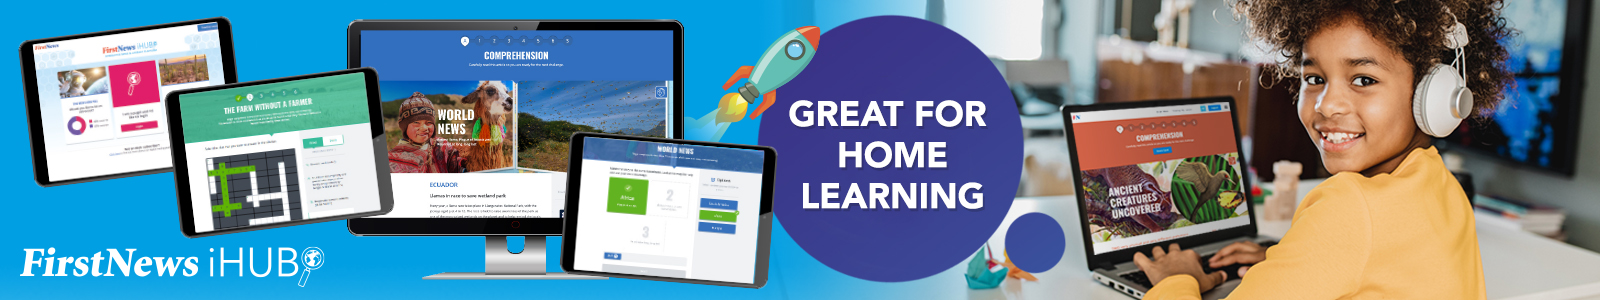 First News iHub - great for home-schooling